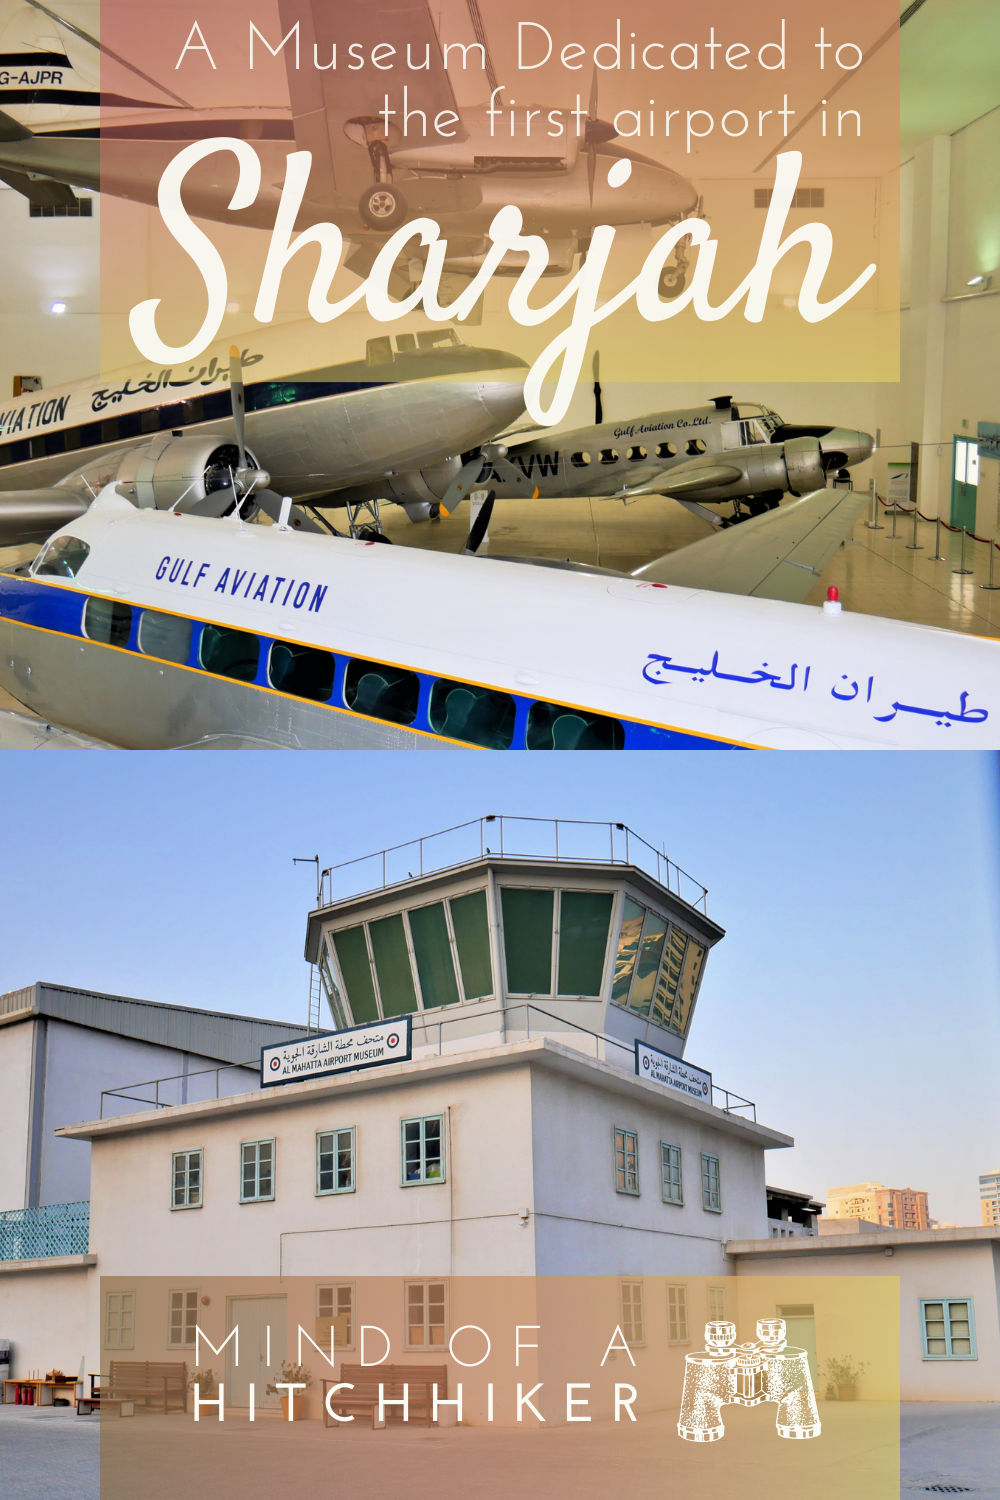 In the middle of Sharjah City is an avenue that used to be the runway of the very first airport of the UAE. Yes, it's older than the airports in Dubai and Abu Dhabi! You can visit this nice museum called Al Mahatta where you can learn about the history and look at old planes #AlMahatta #Sharjah #SharjahCity #UAE #UnitedArabEmirates #Gulf #Khaleej #airport #abandonedairport #aircraft #museum #aviation #history #abandonedplaces #Dubai #AbuDhabi #SharjahAirport #airplane #emirate #AirArabia